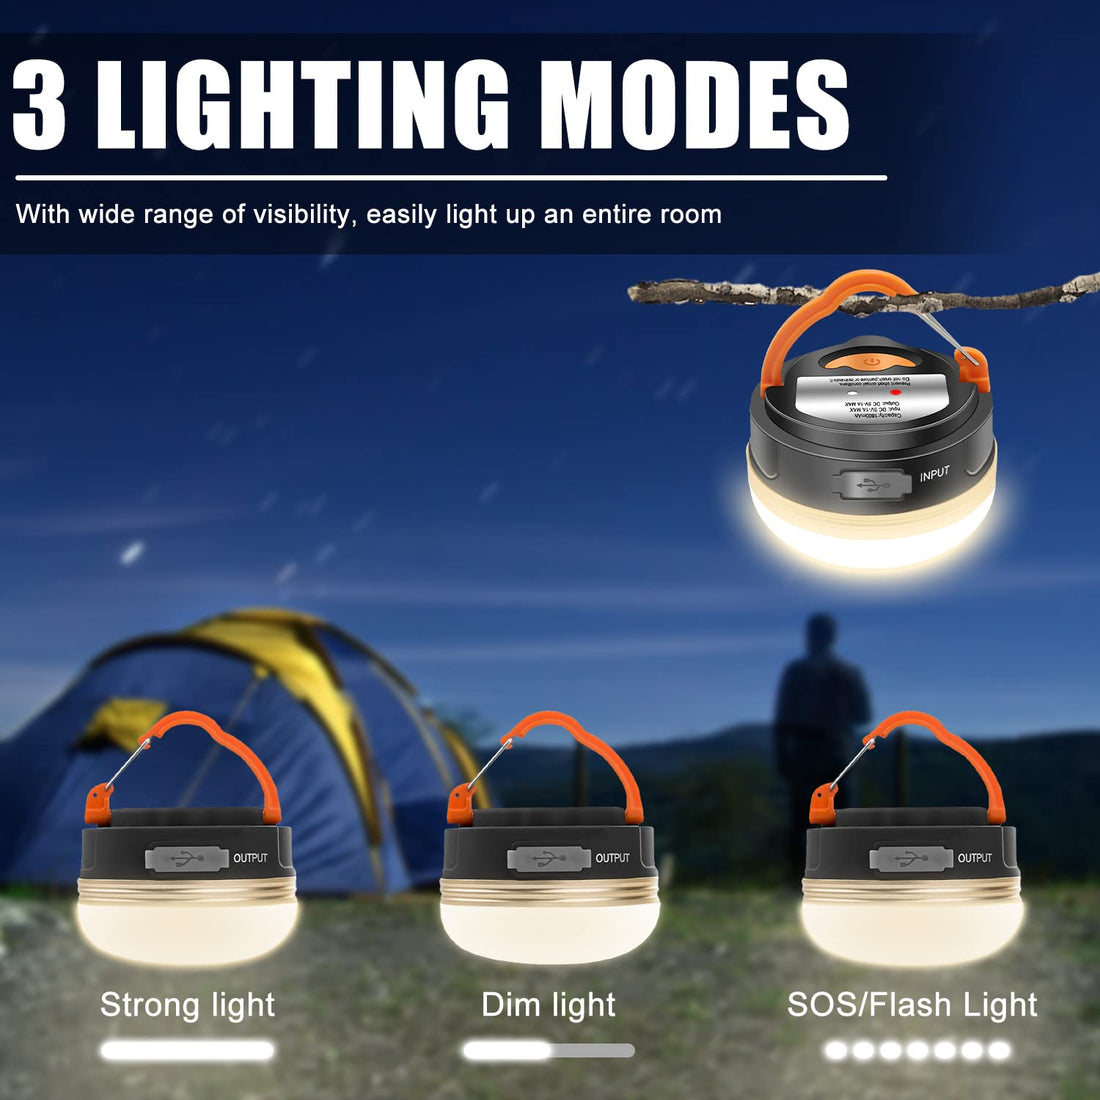 Rechargeable LED Camping Lantern XTAUTO Portable 360 Illumination 3 Lighting Mode 1800mAh Power Bank Waterproof w/ Hook Magnetic Base Tent Emergency Light for Camping Hurricanes Power Outage 2-Pack